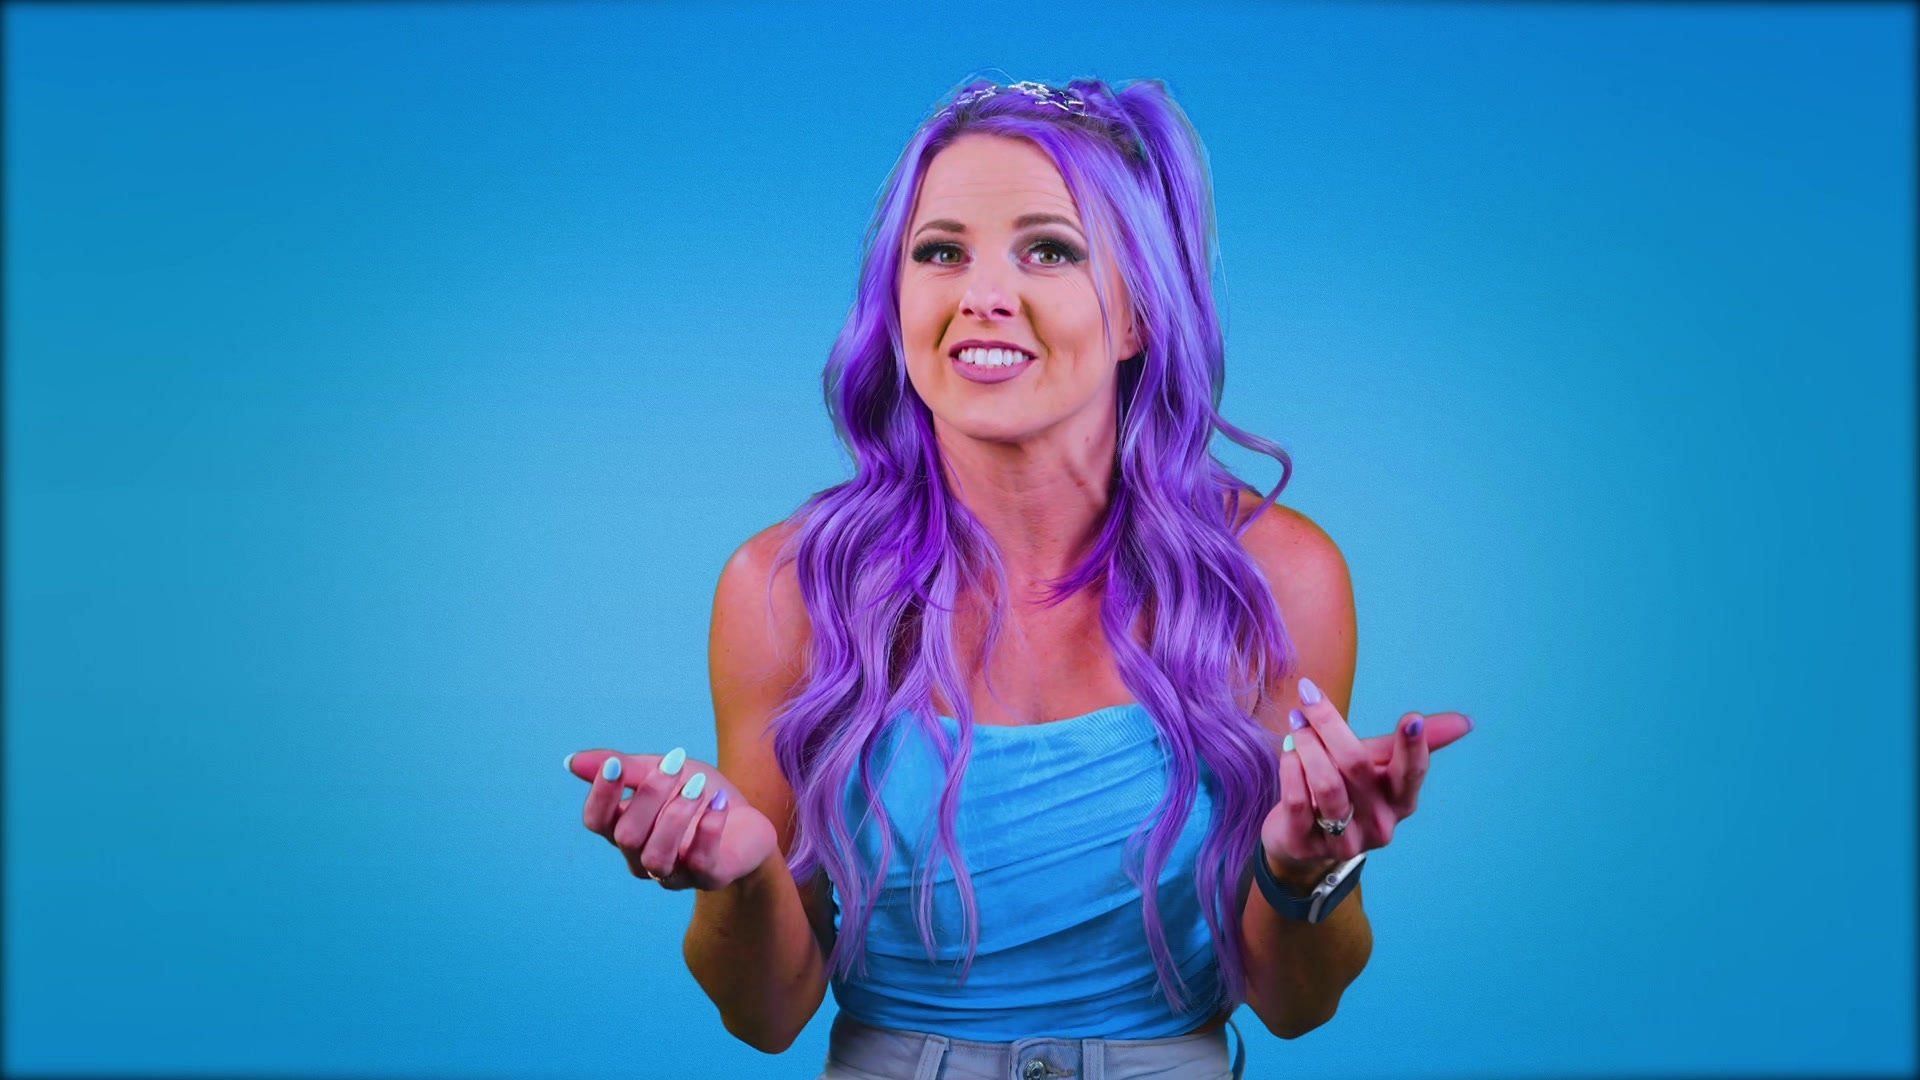 Candice LeRae is a former NXT Superstar.